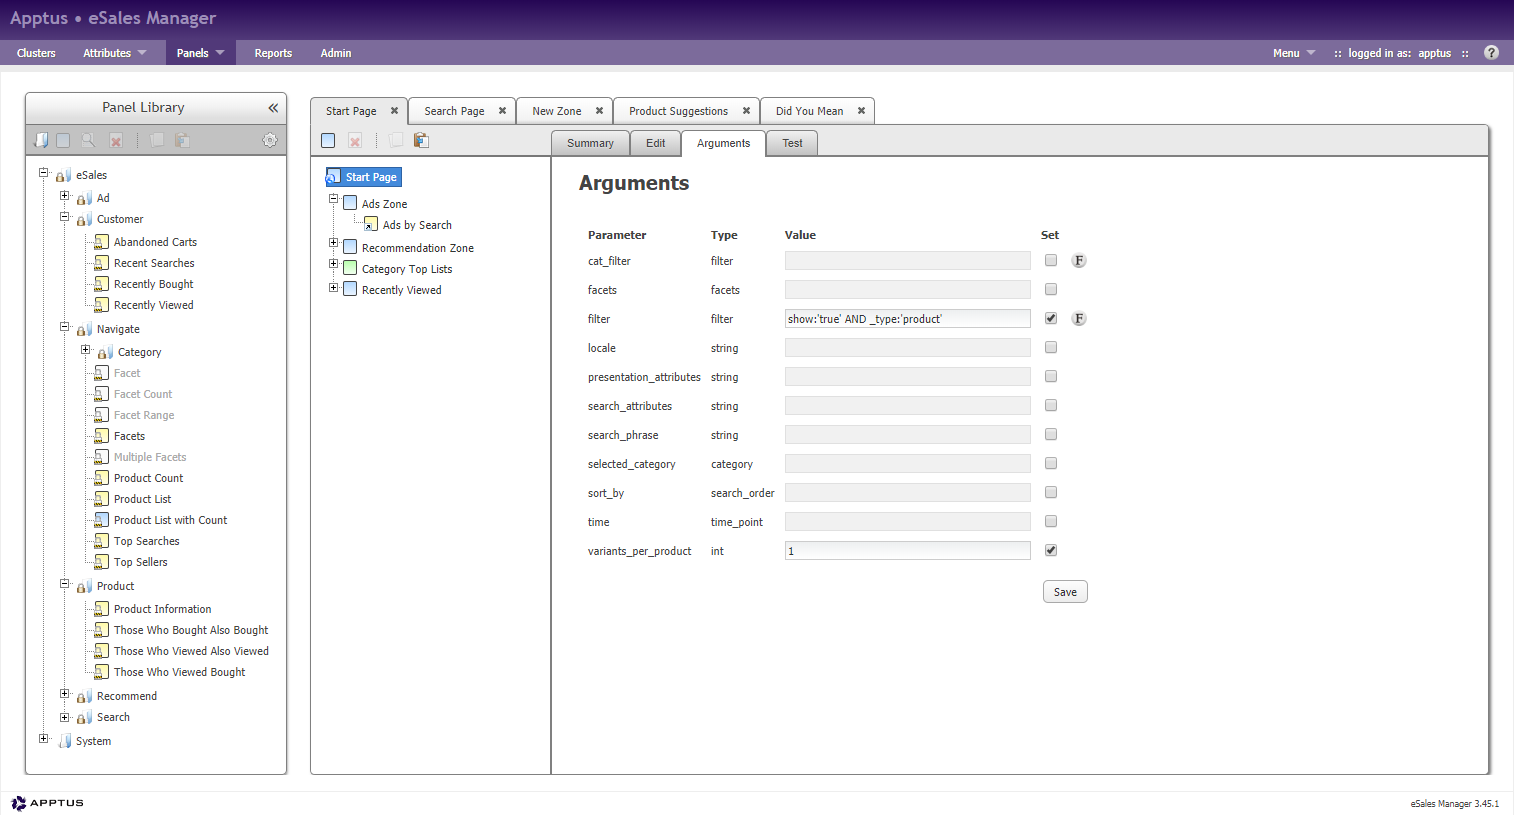 Graphic showing panel configuration in Apptus eSales Manager